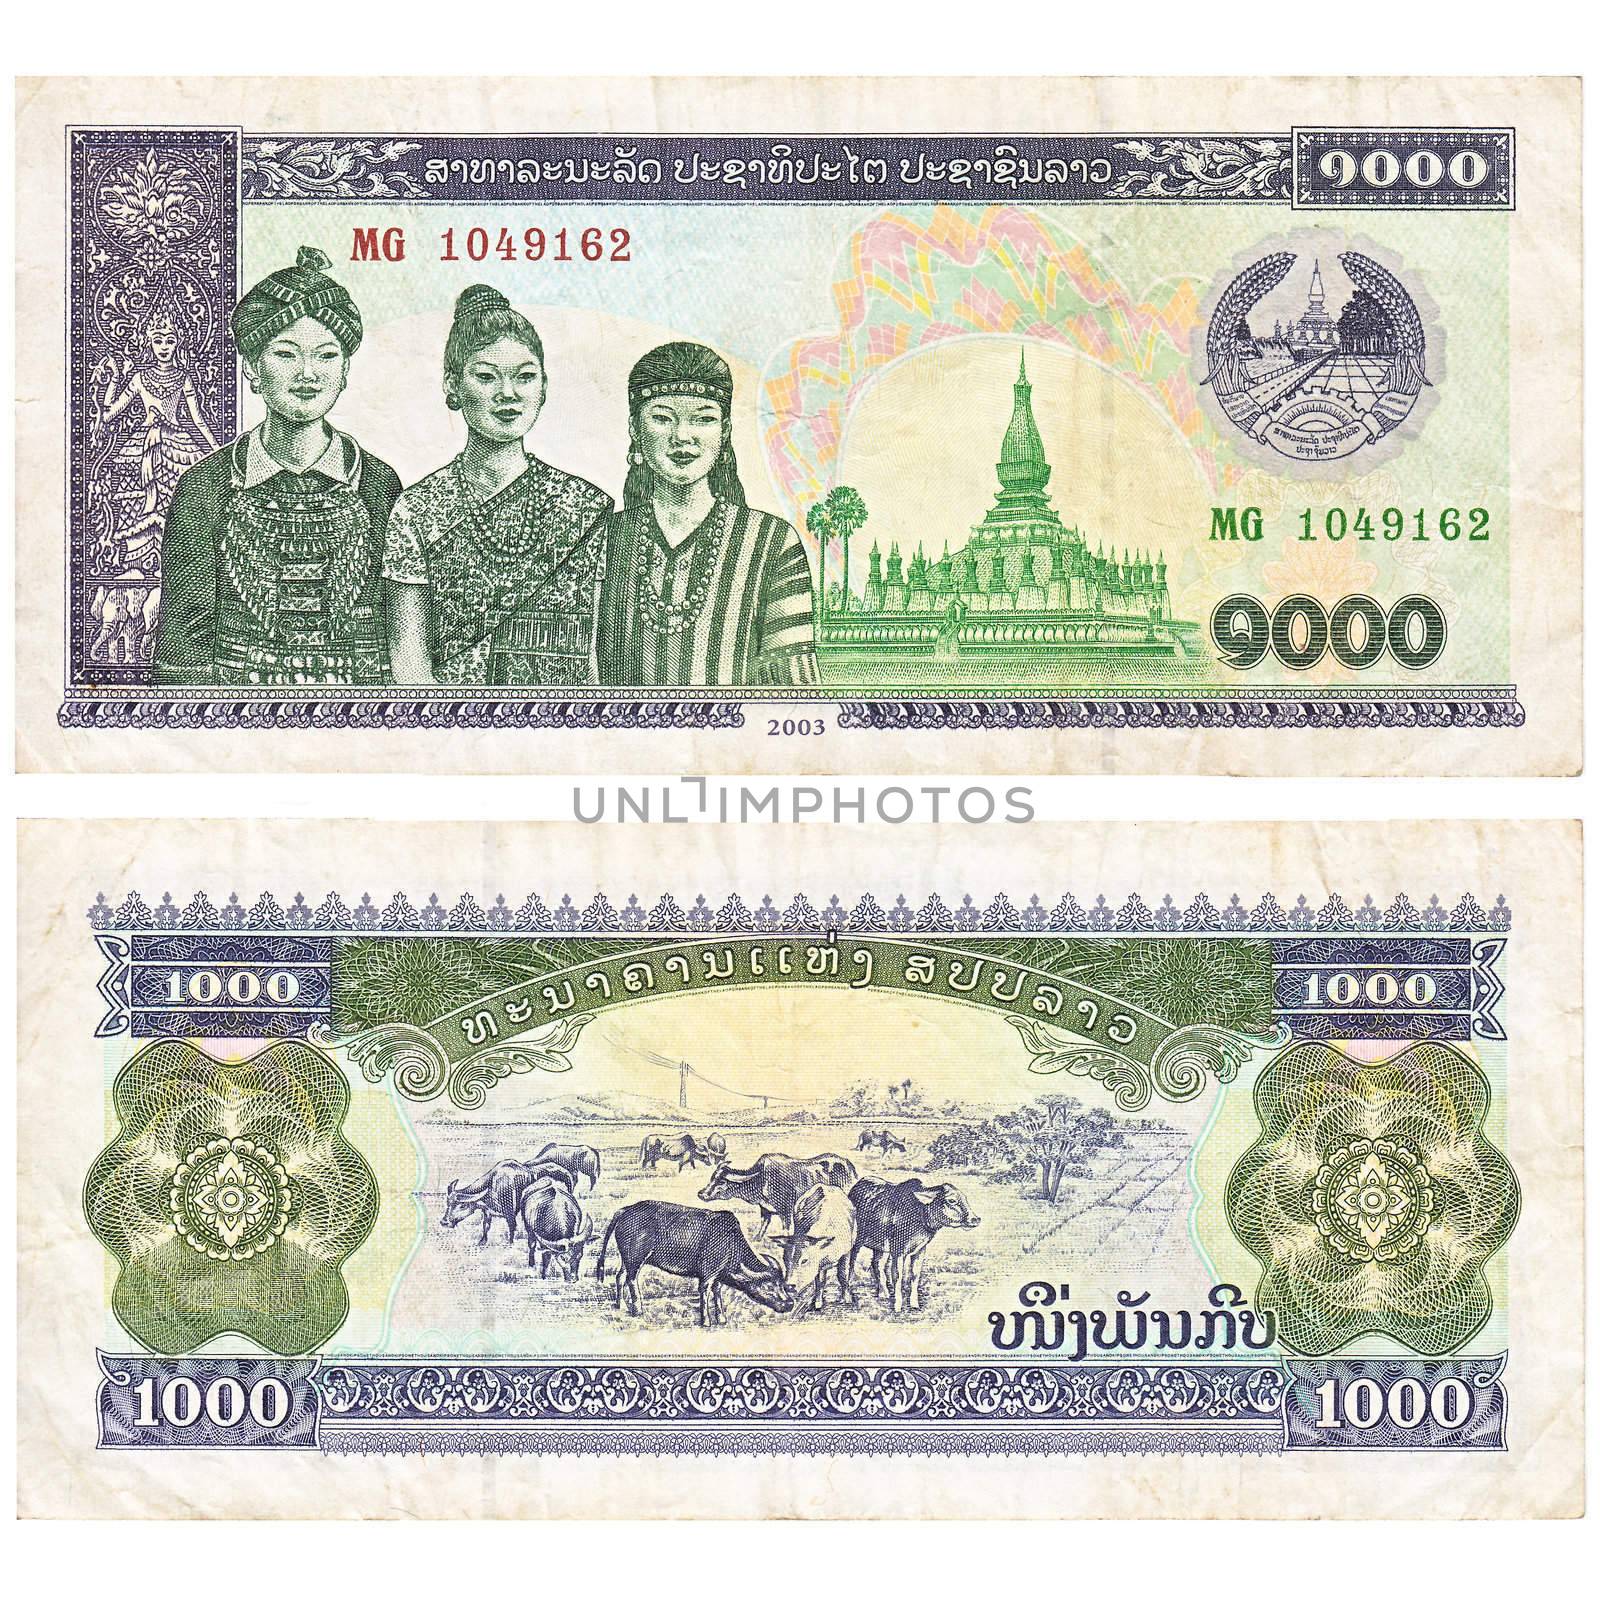 Laotian 1000 kip banknote, both sides over white background